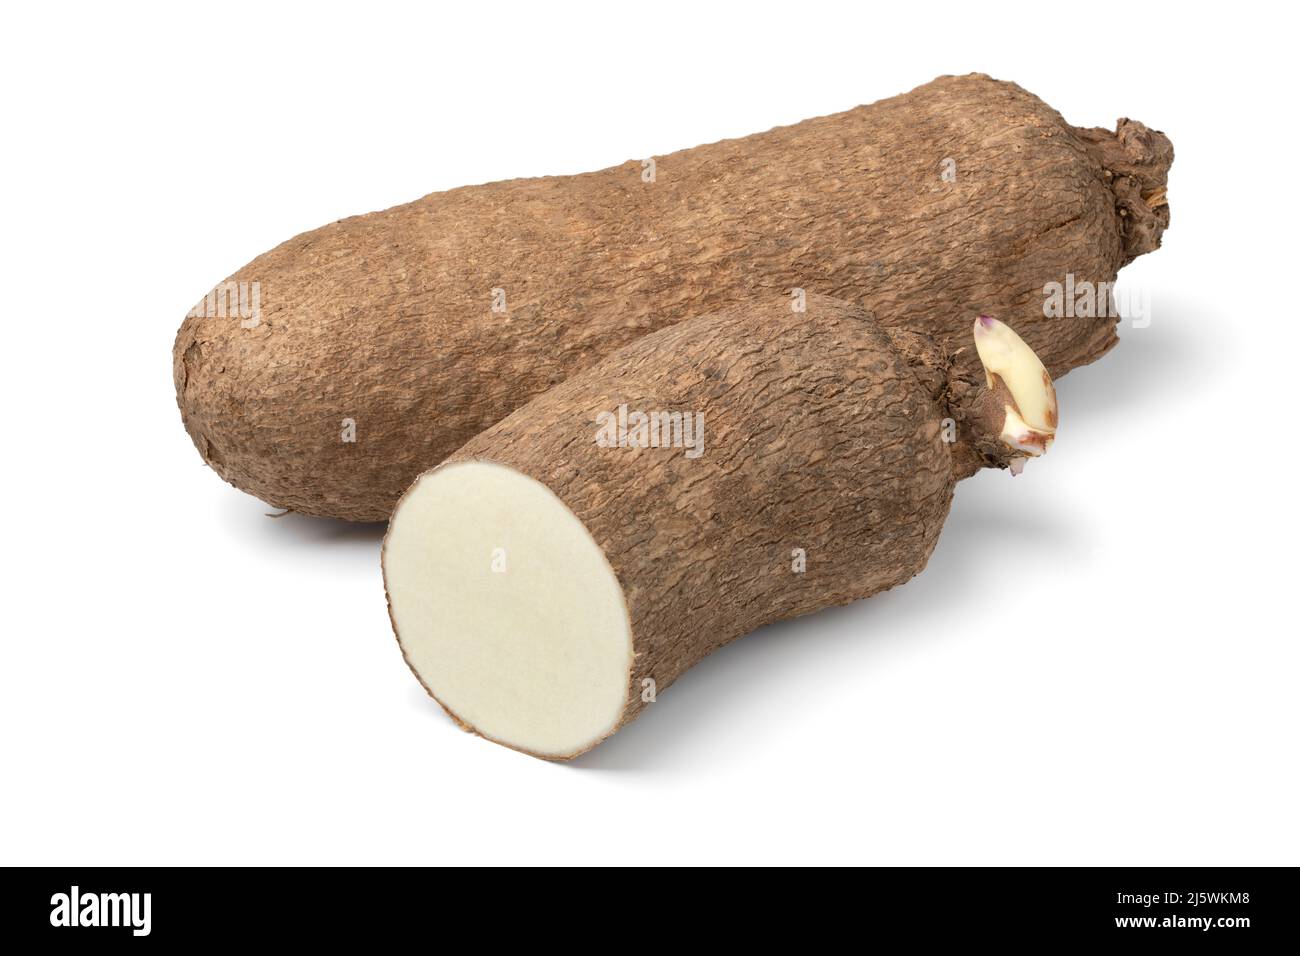 Whole and halved raw African yam isolated on white background Stock Photo